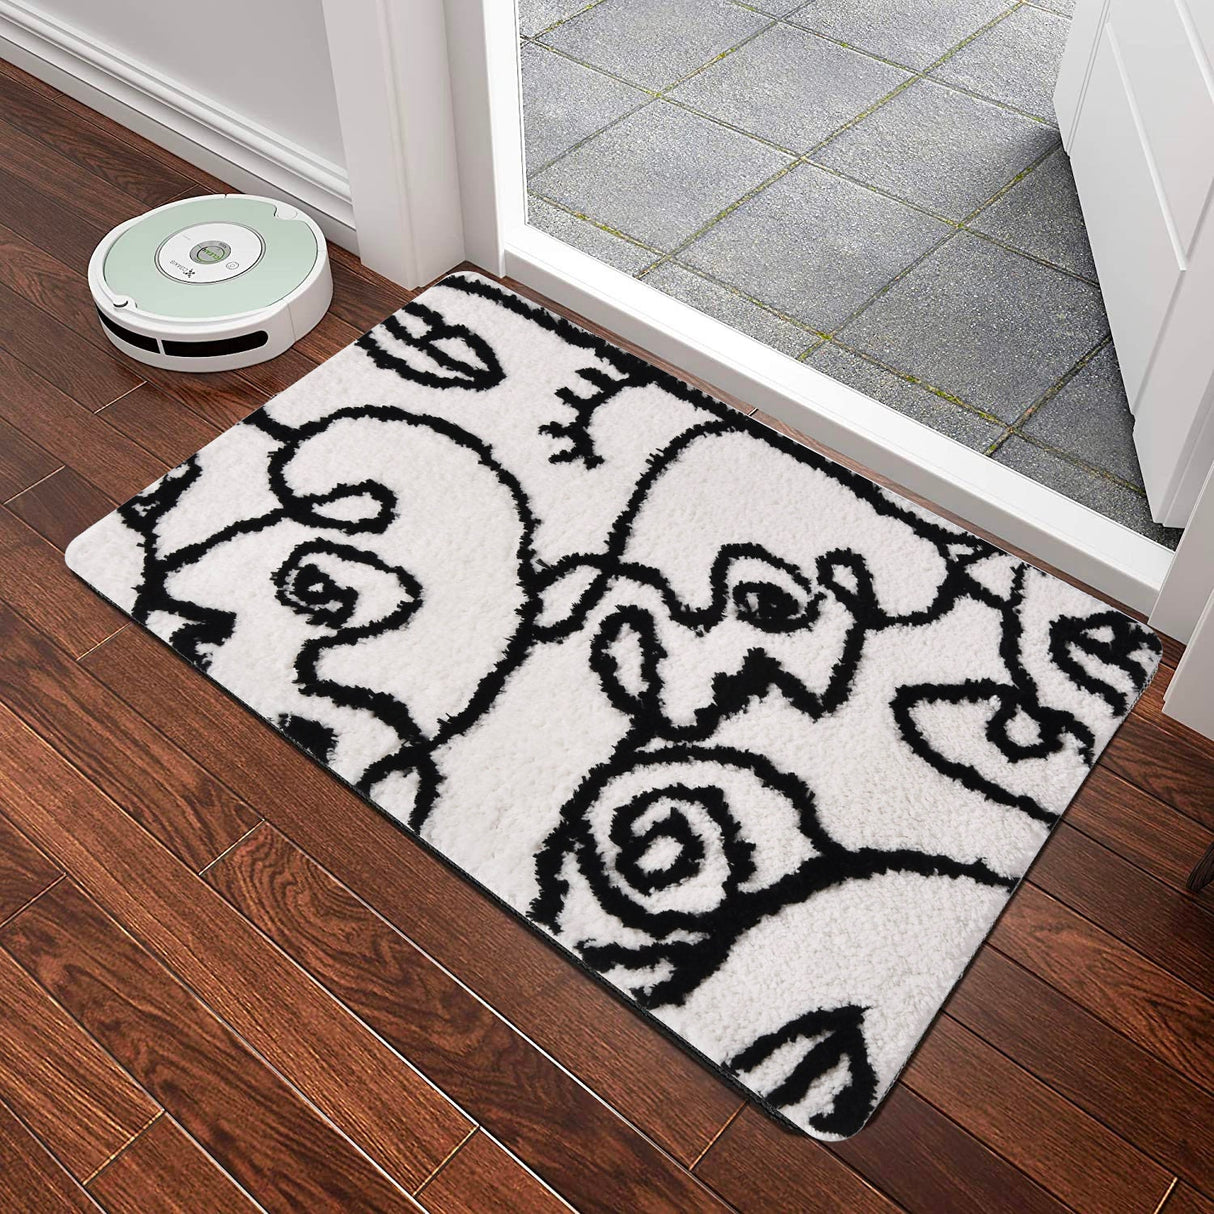 Abstract Woman Face Bath Mat, Soft Bathroom Rug, Tufted Bath Rug, Water Absorbent Non-Slip Bathroom Mat for Home Décor, Picasso Shower Rugs